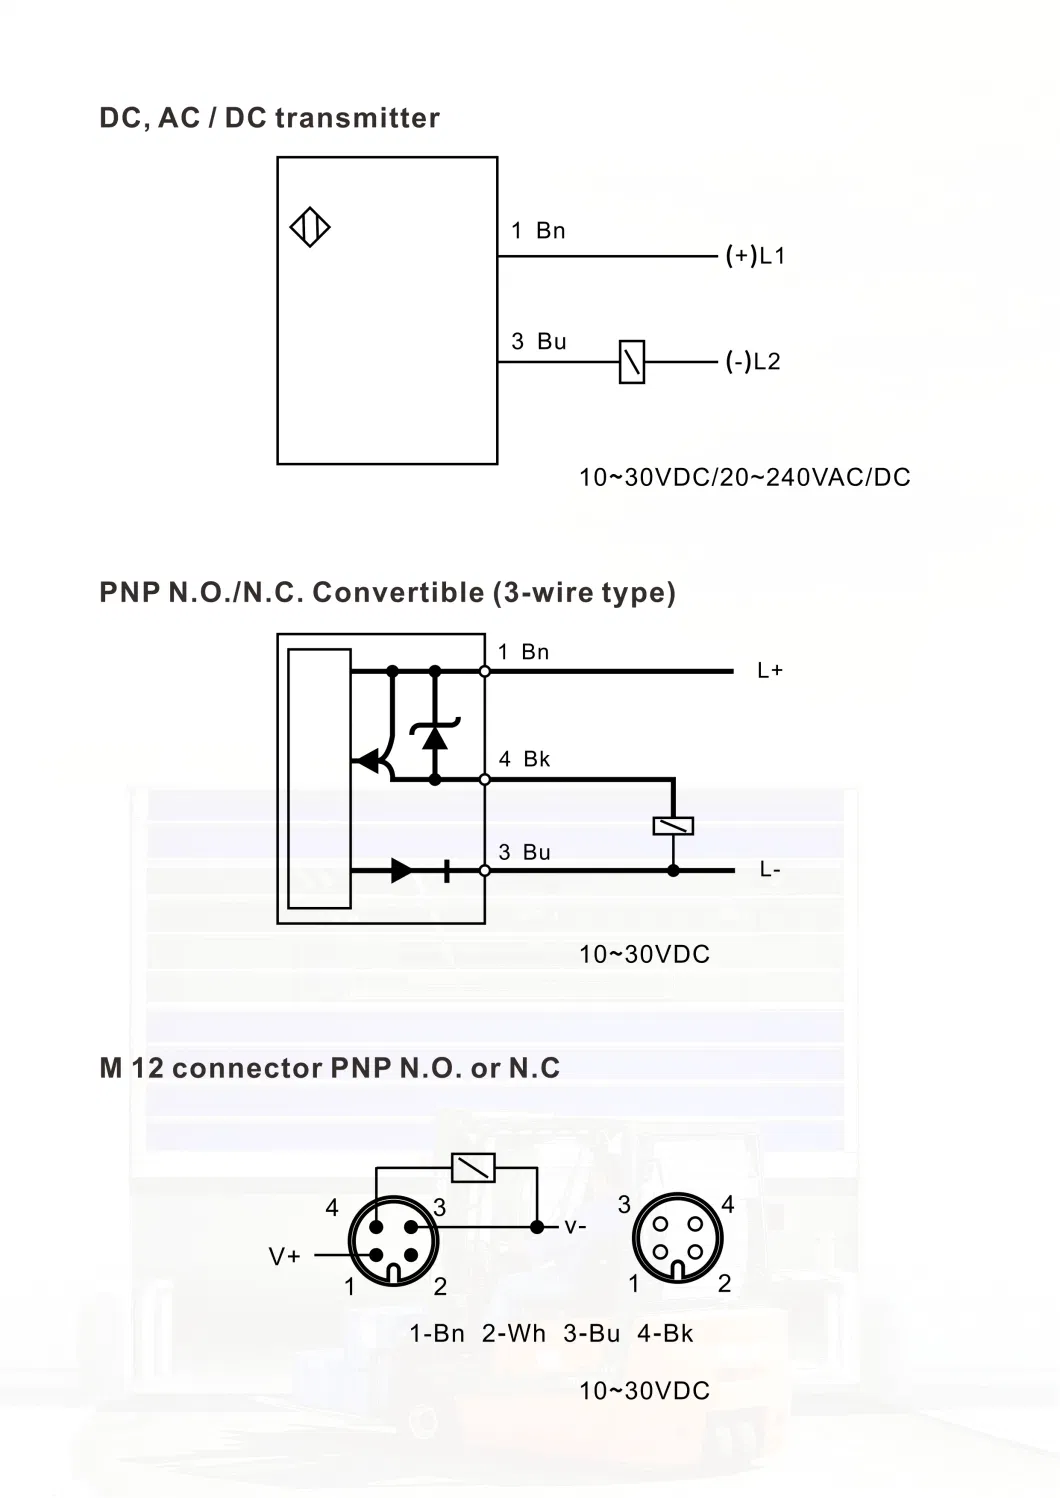 Retro-Reflective Optical Sensor for High Speed Doors with NPN No Nc Output